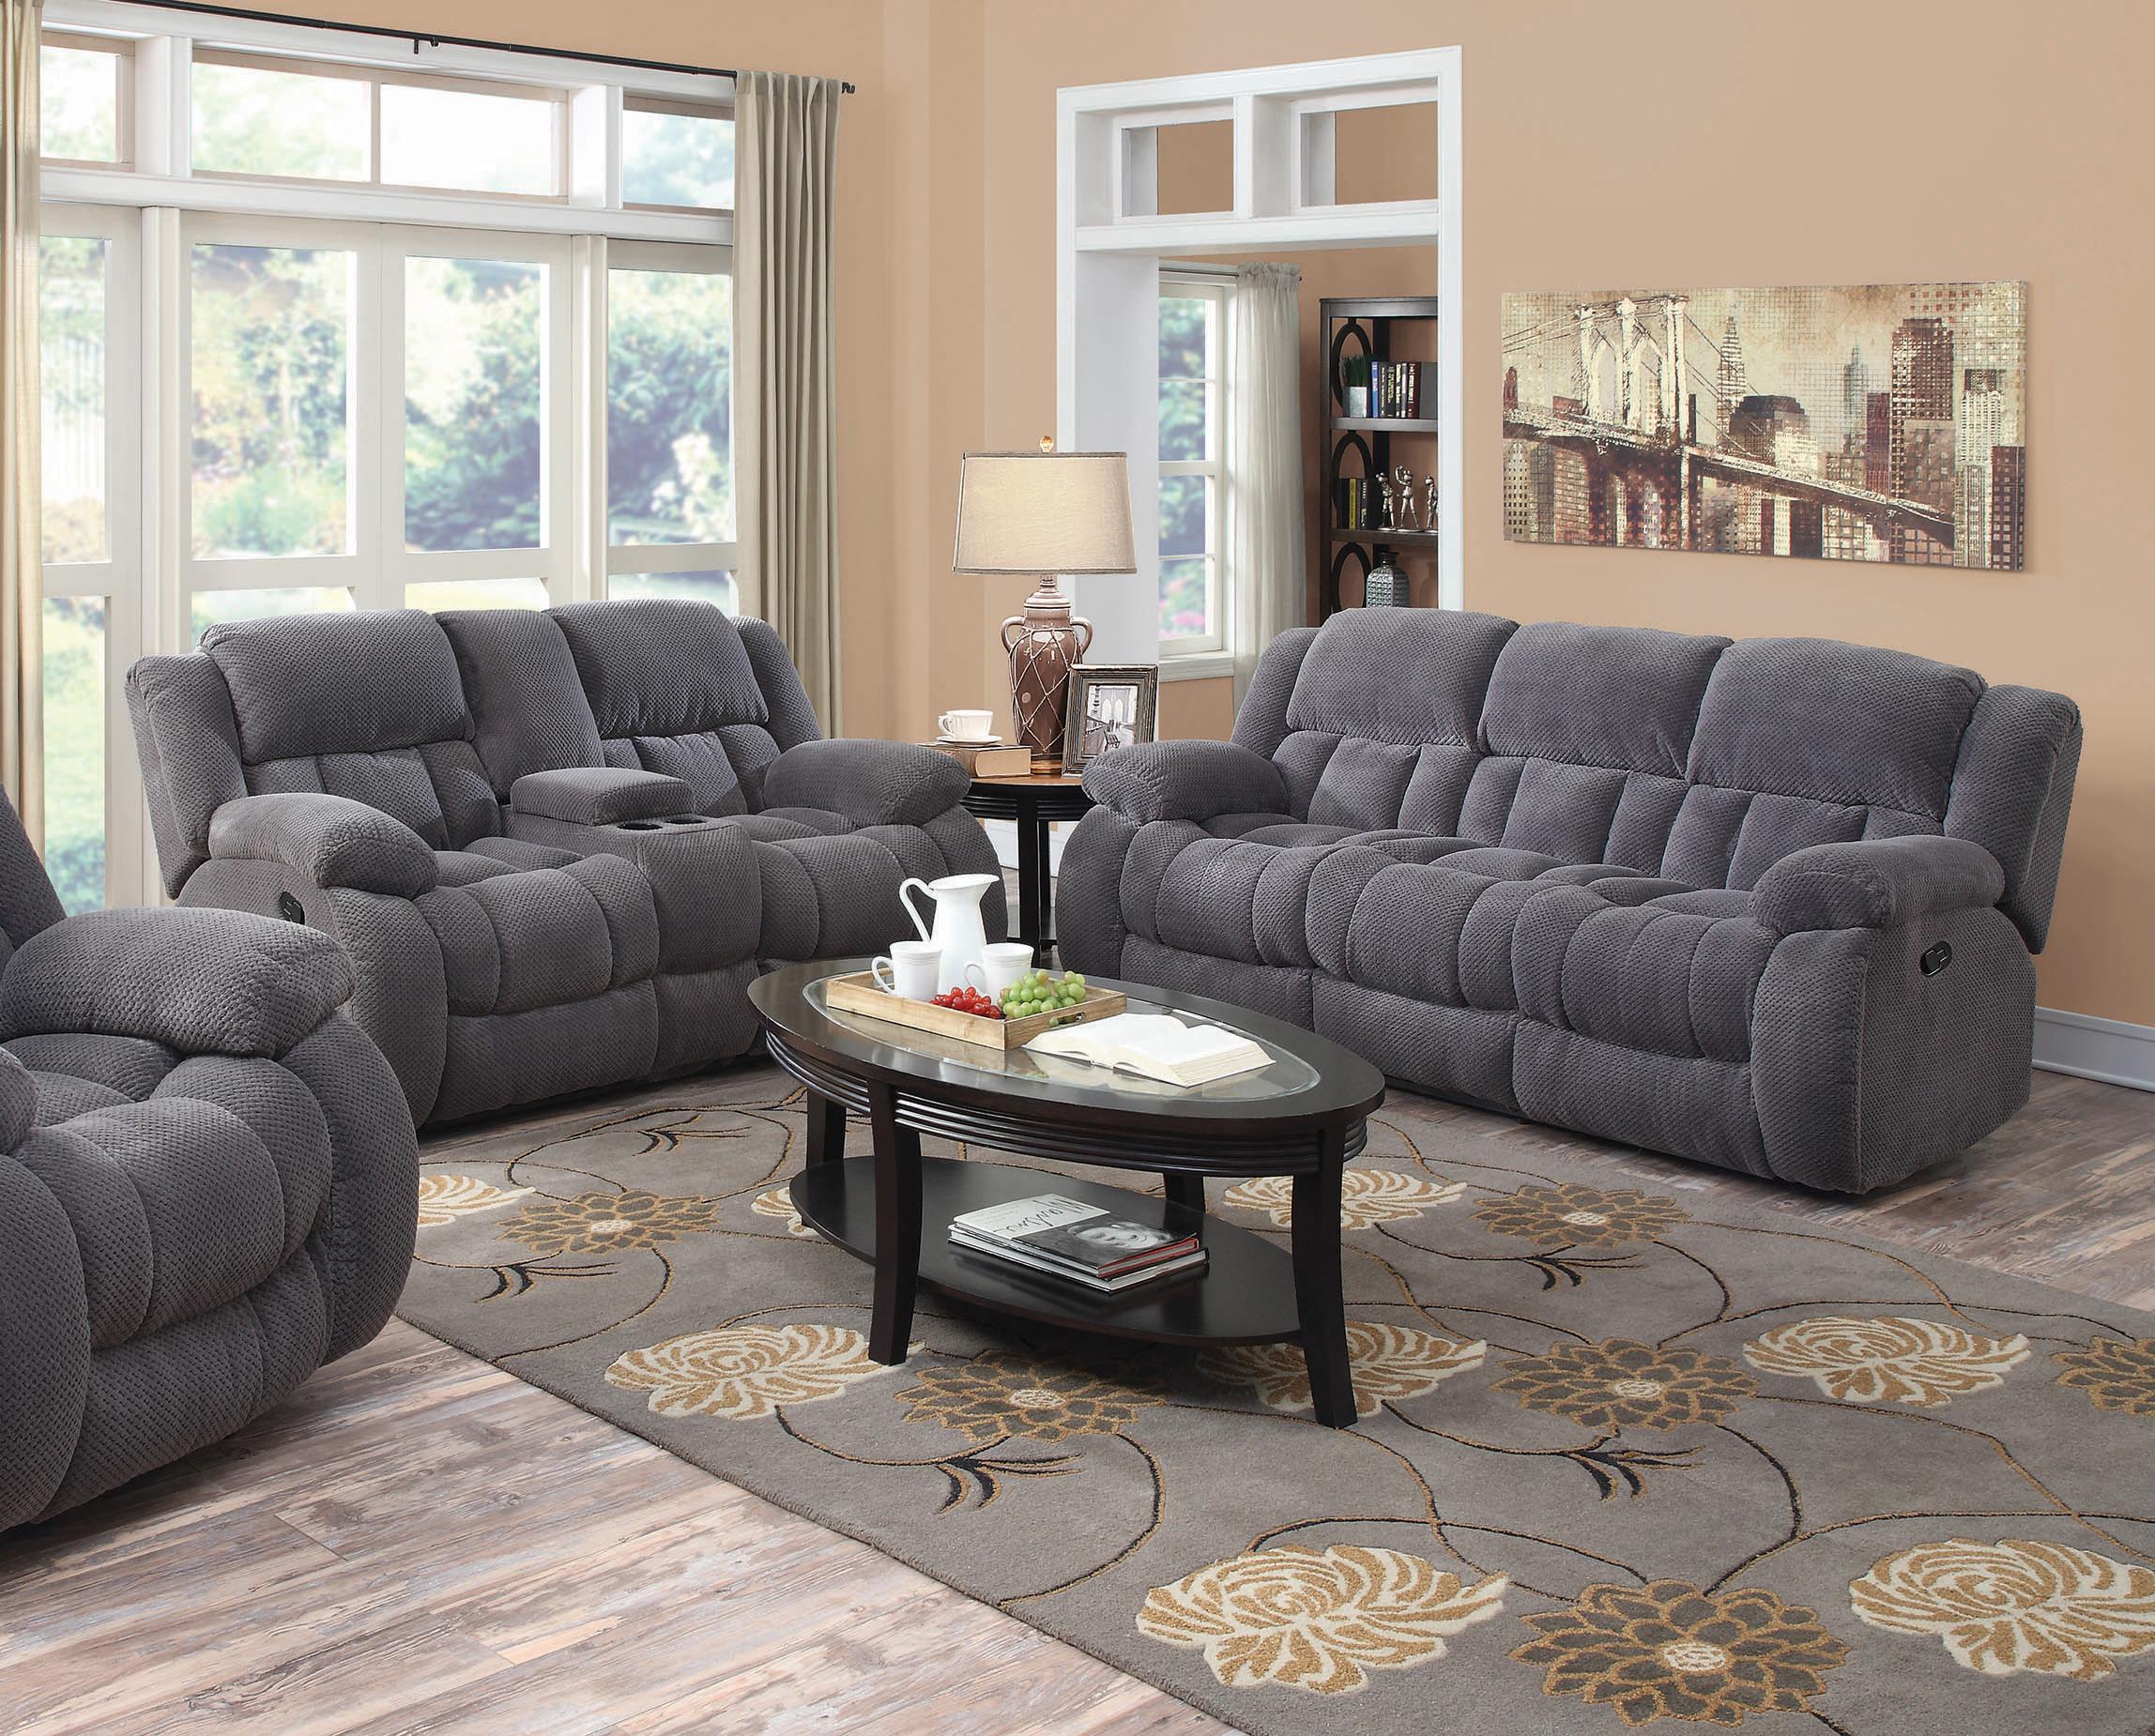 Contemporary Living Room Set 601921-S2 Weissman 601921-S2 in Charcoal 